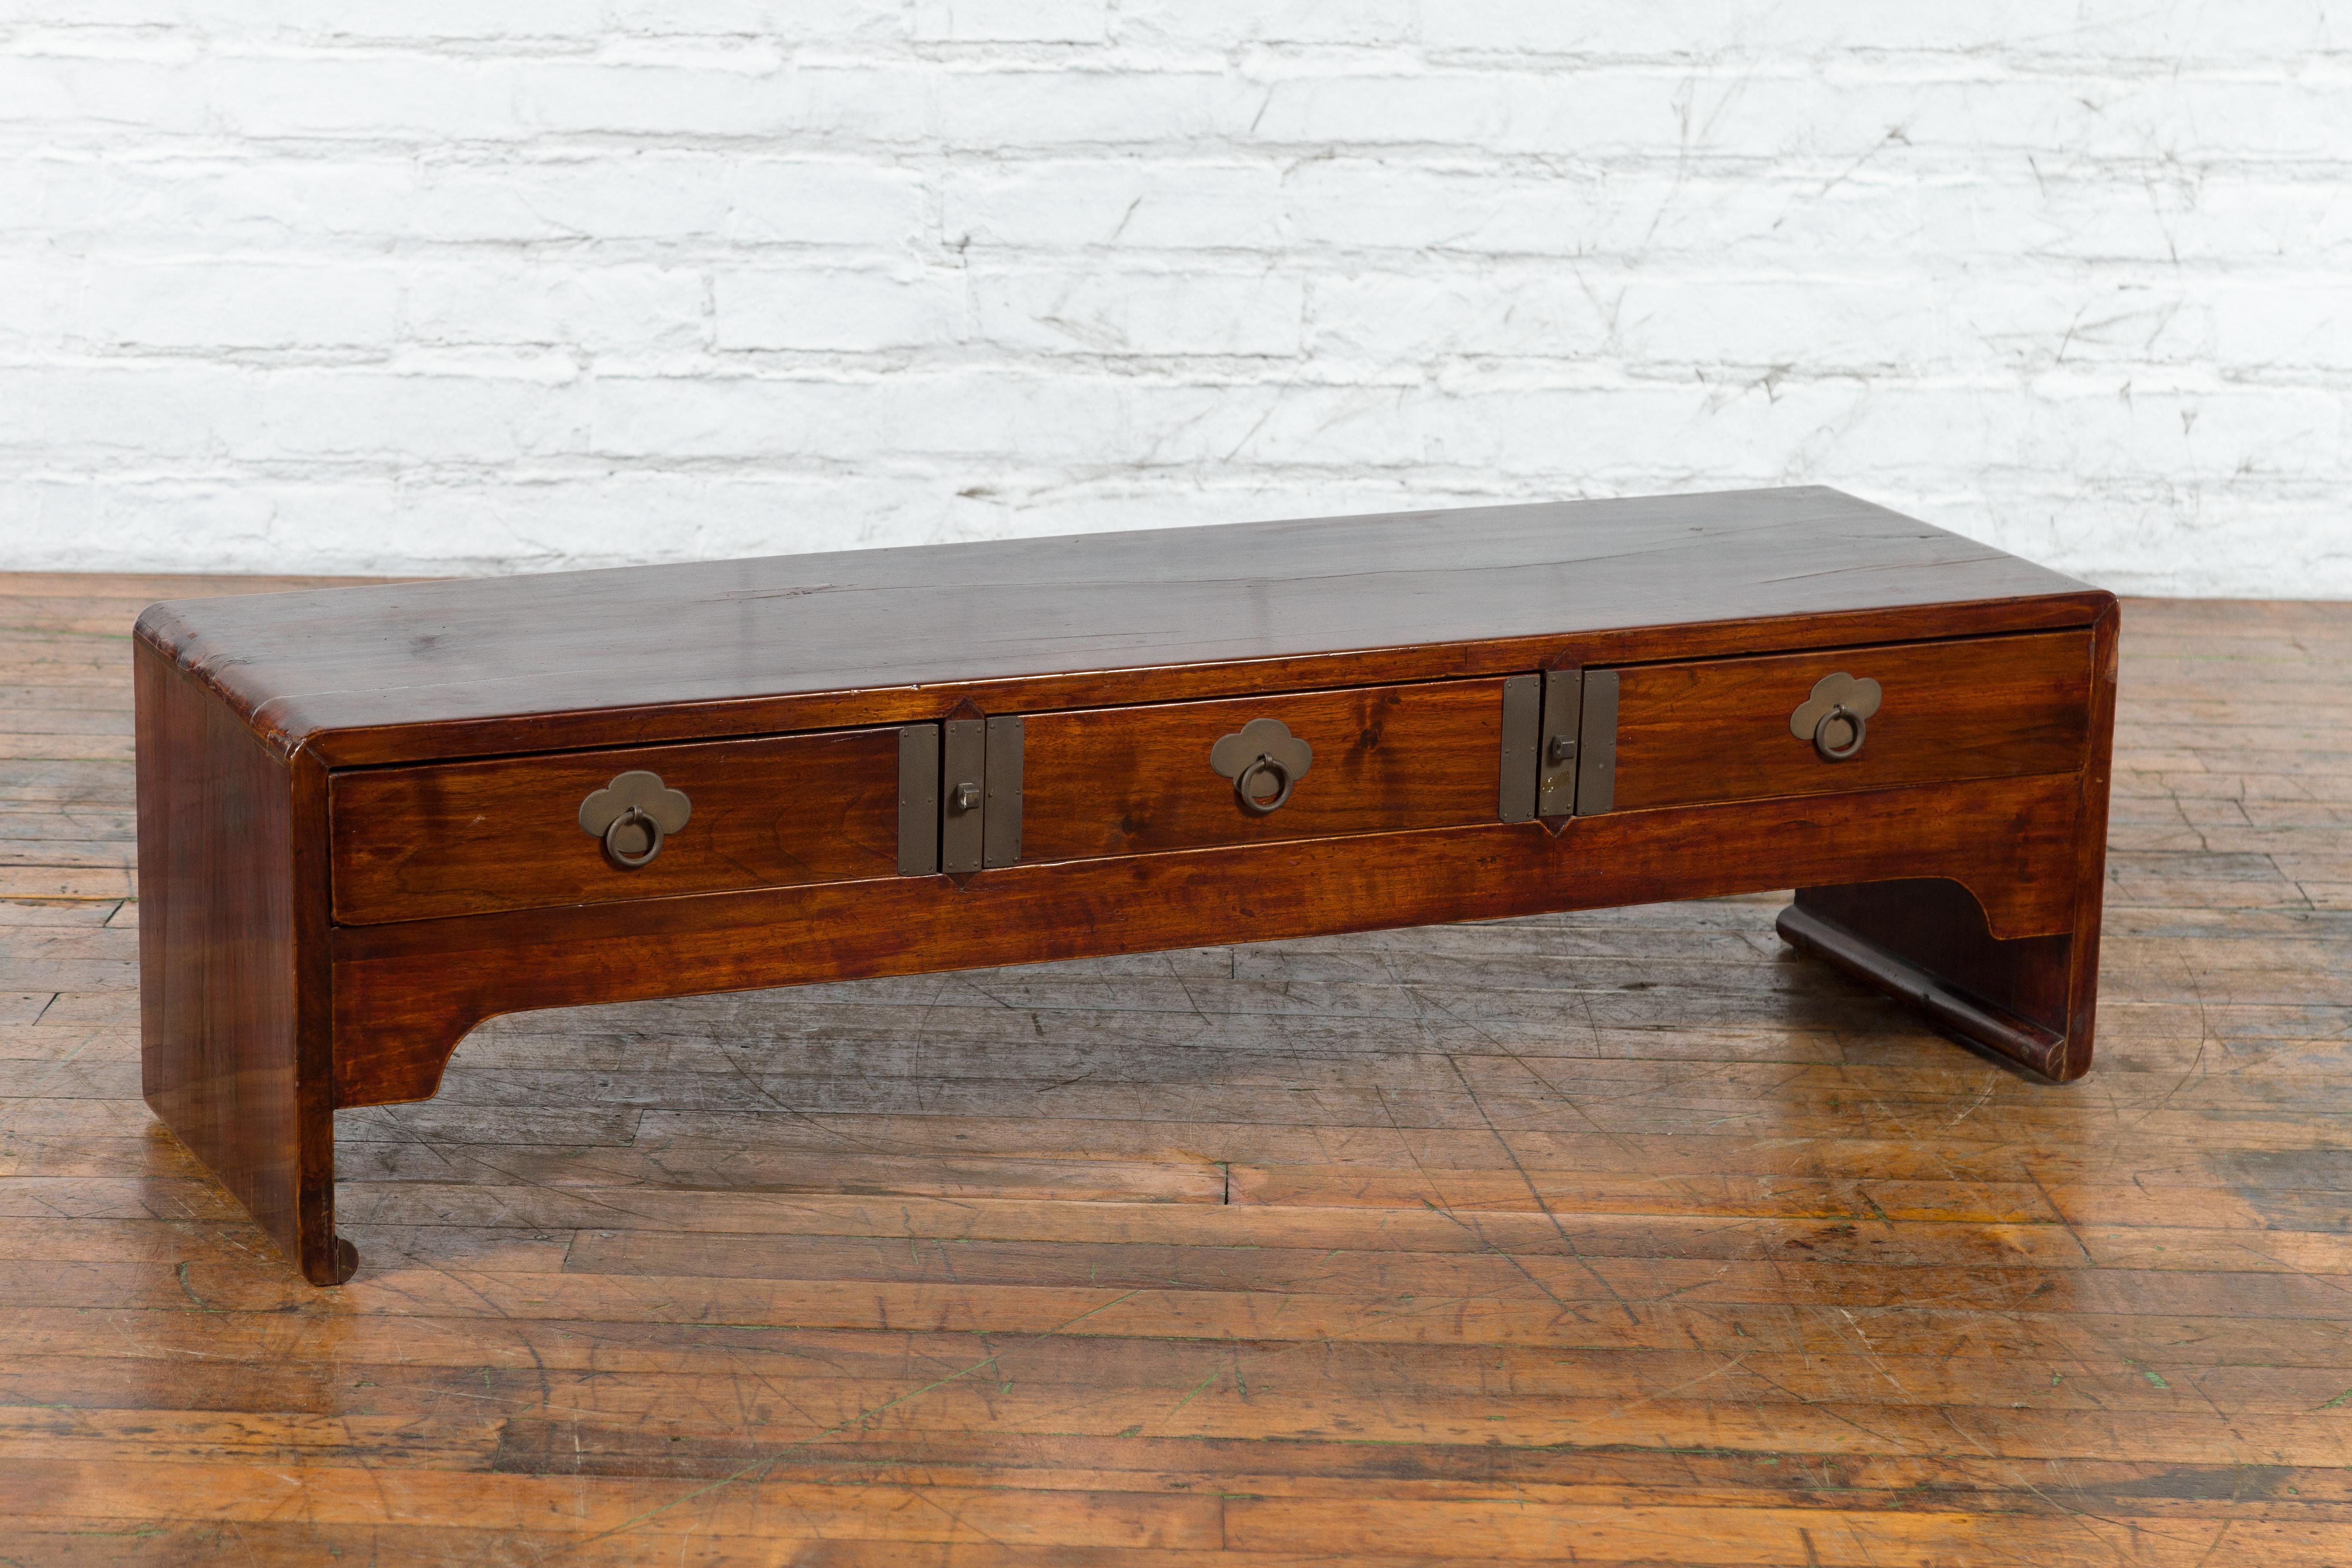 Late Qing Dynasty Chinese Low Kang Waterfall Table with Drawers and Brass Plates For Sale 12